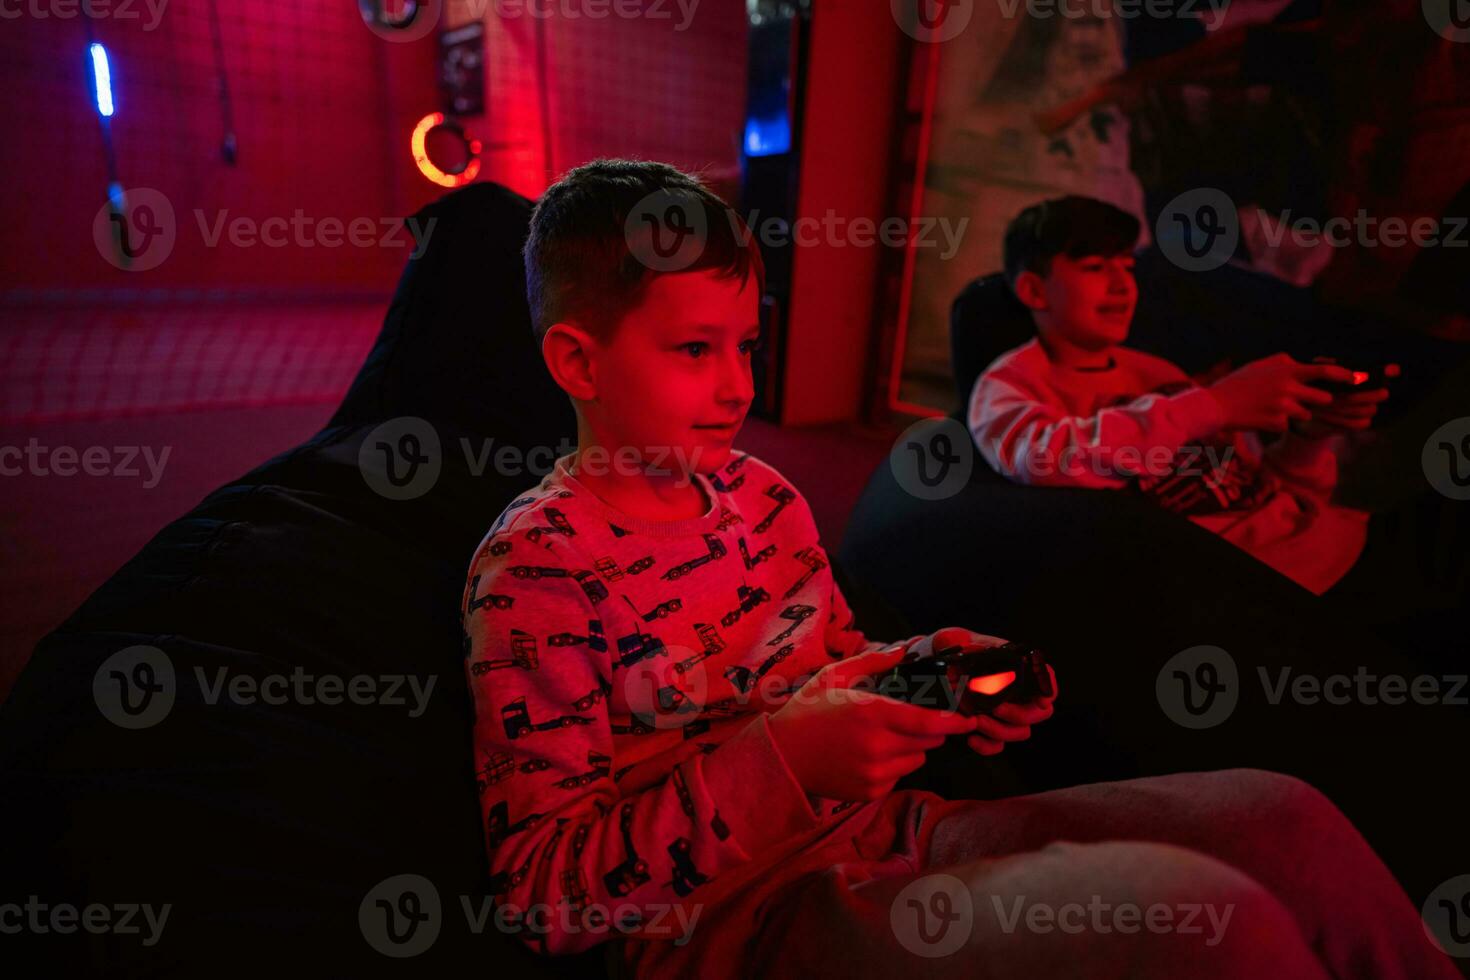 Two boys gamers play gamepad video game console in red gaming room. photo